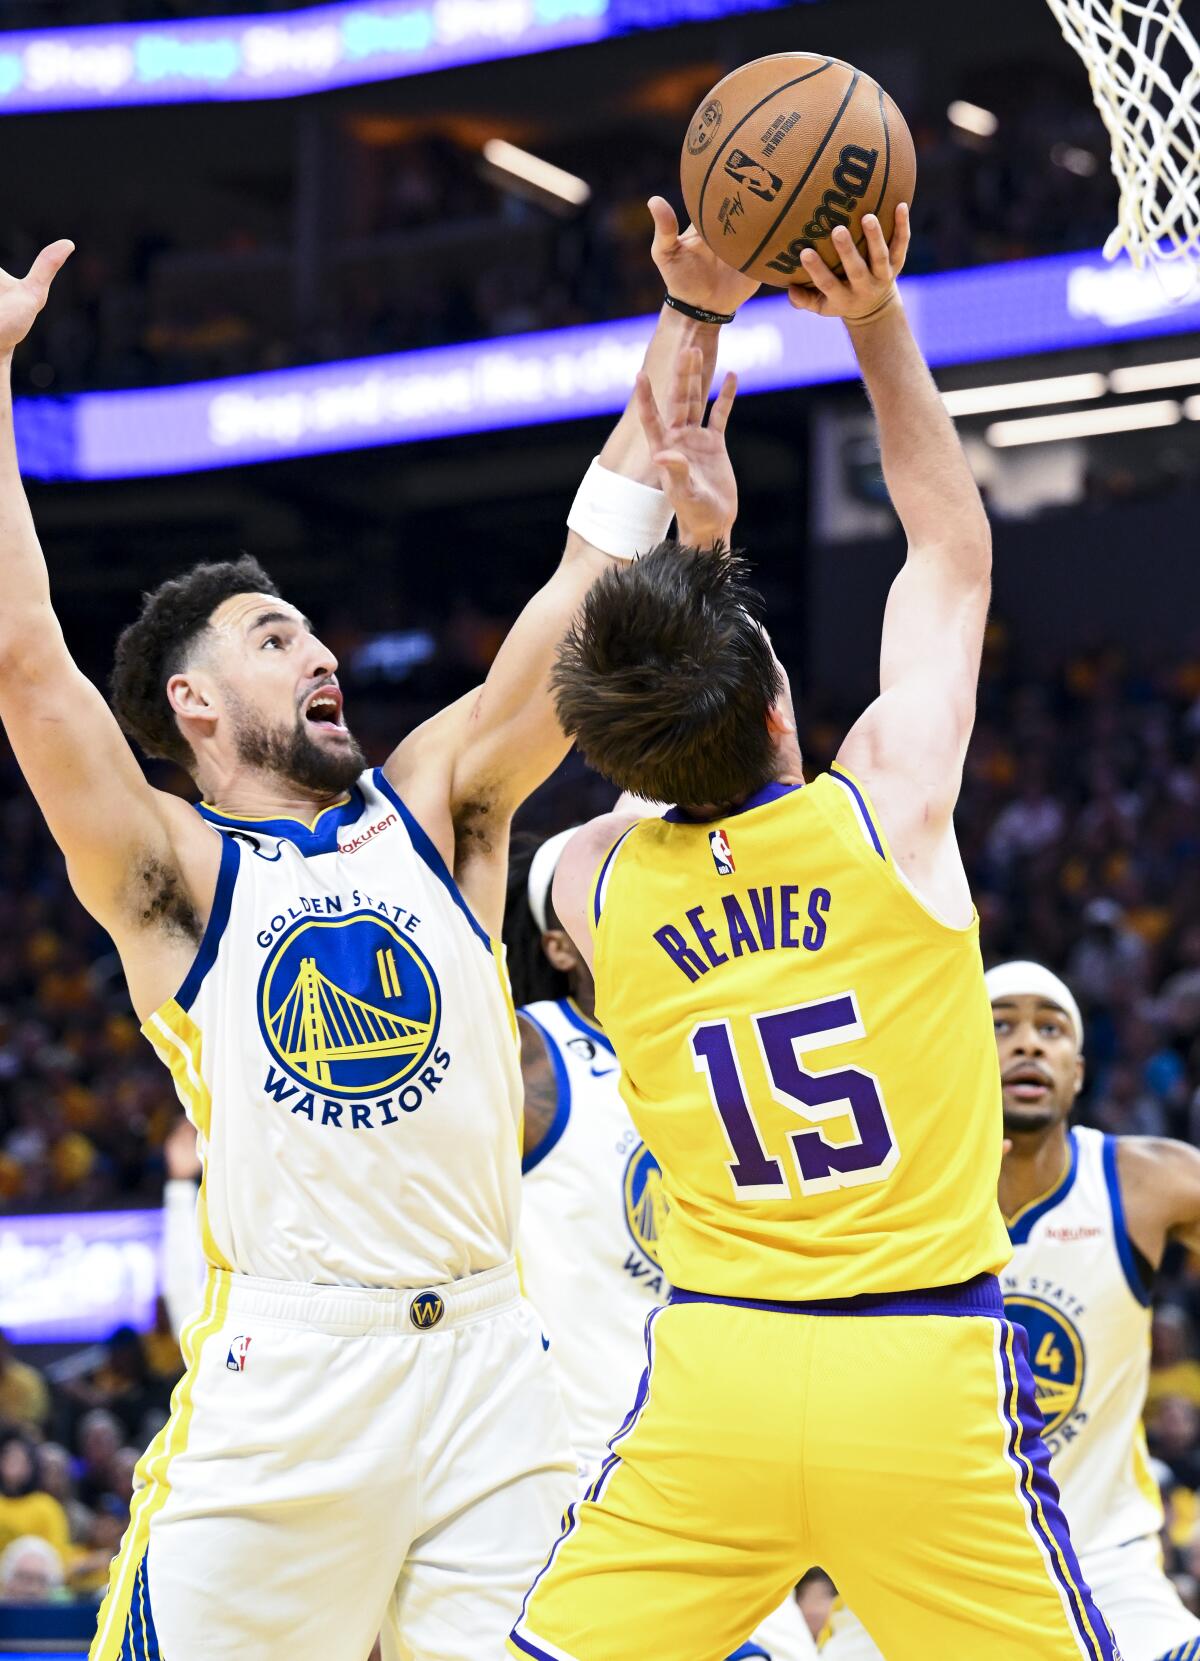 FOX5 Las Vegas on X: NOW: #Lakers vs. #Warriors game is set to